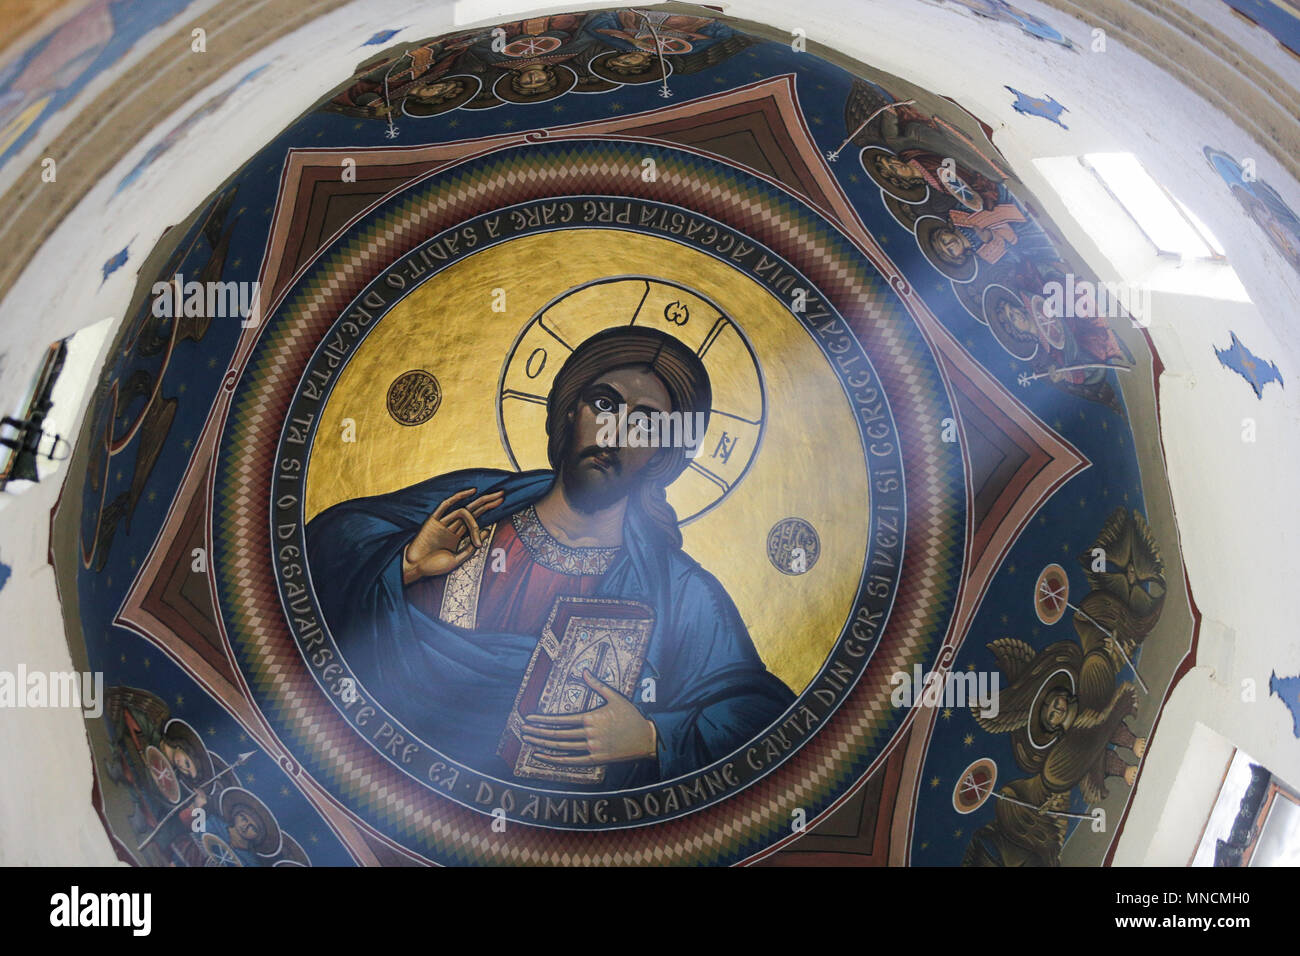 BUCHAREST, ROMANIA - APRIL 27, 2018: Painting of Jesus Pantocratoros, Ruler of the Universe, on the Dome of the Christian Orthodox Church Saint Ioan Stock Photo